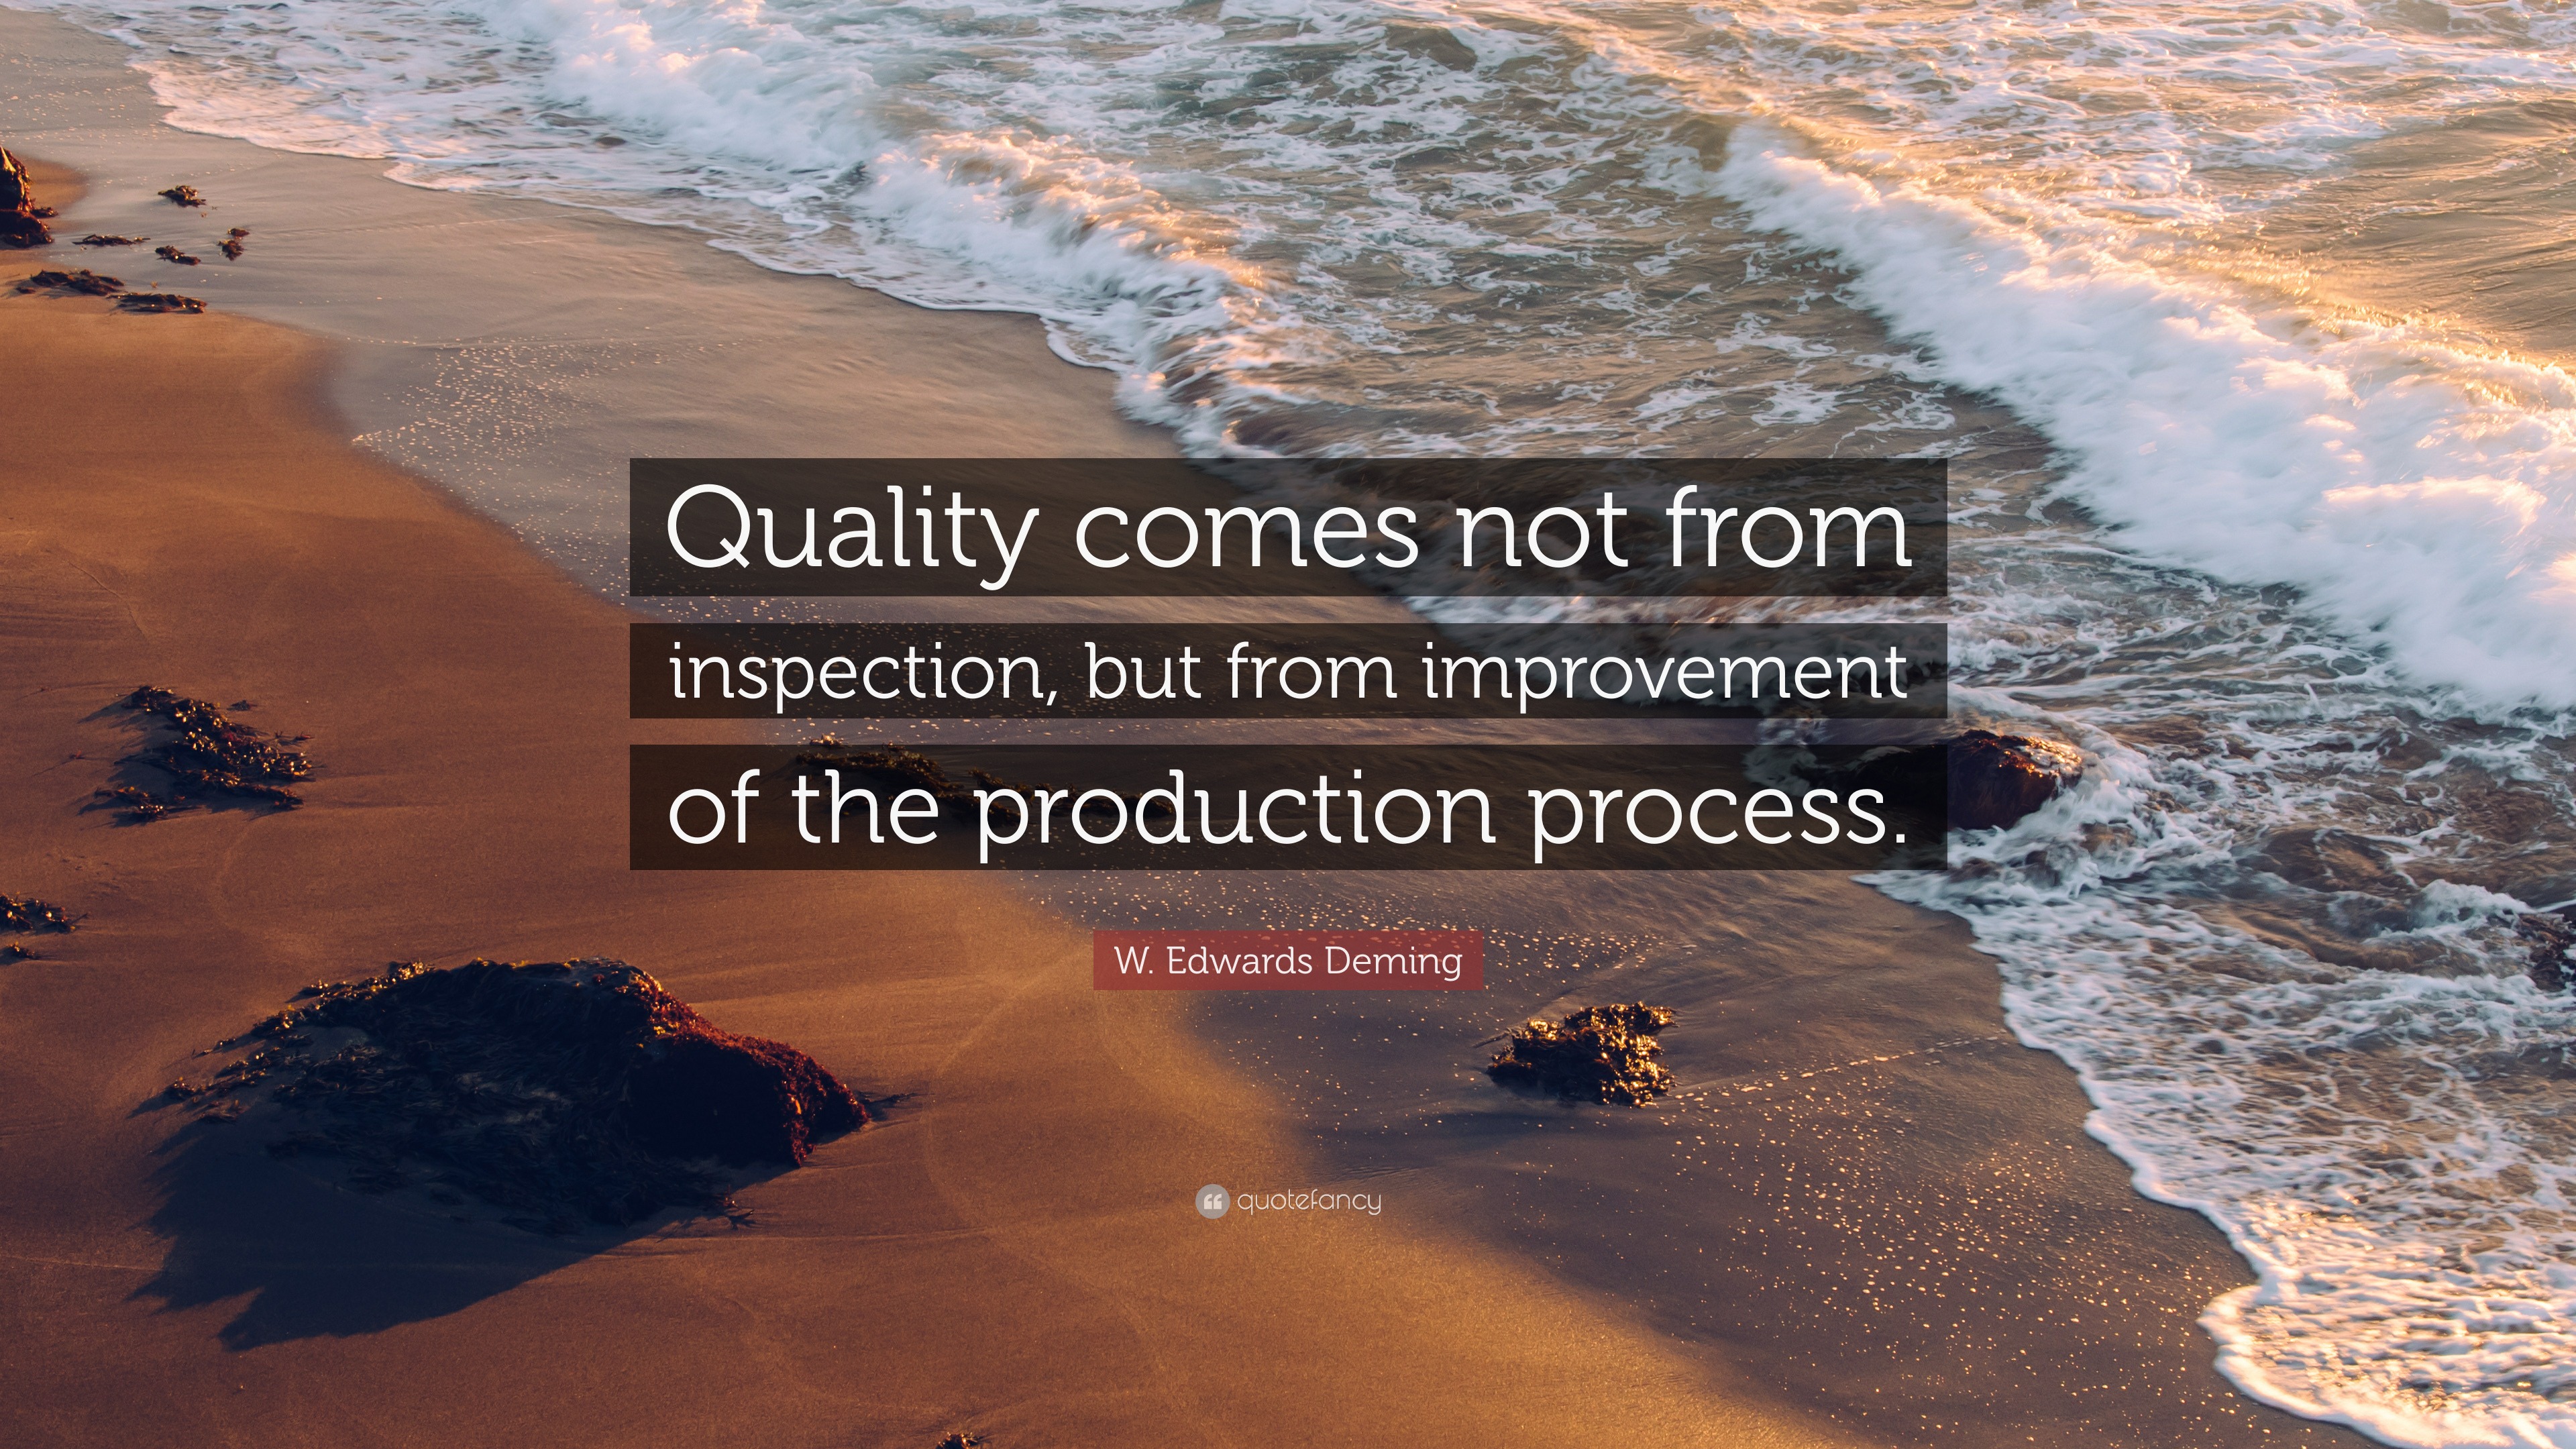 W. Edwards Deming Quote: “Quality comes not from inspection, but from ...